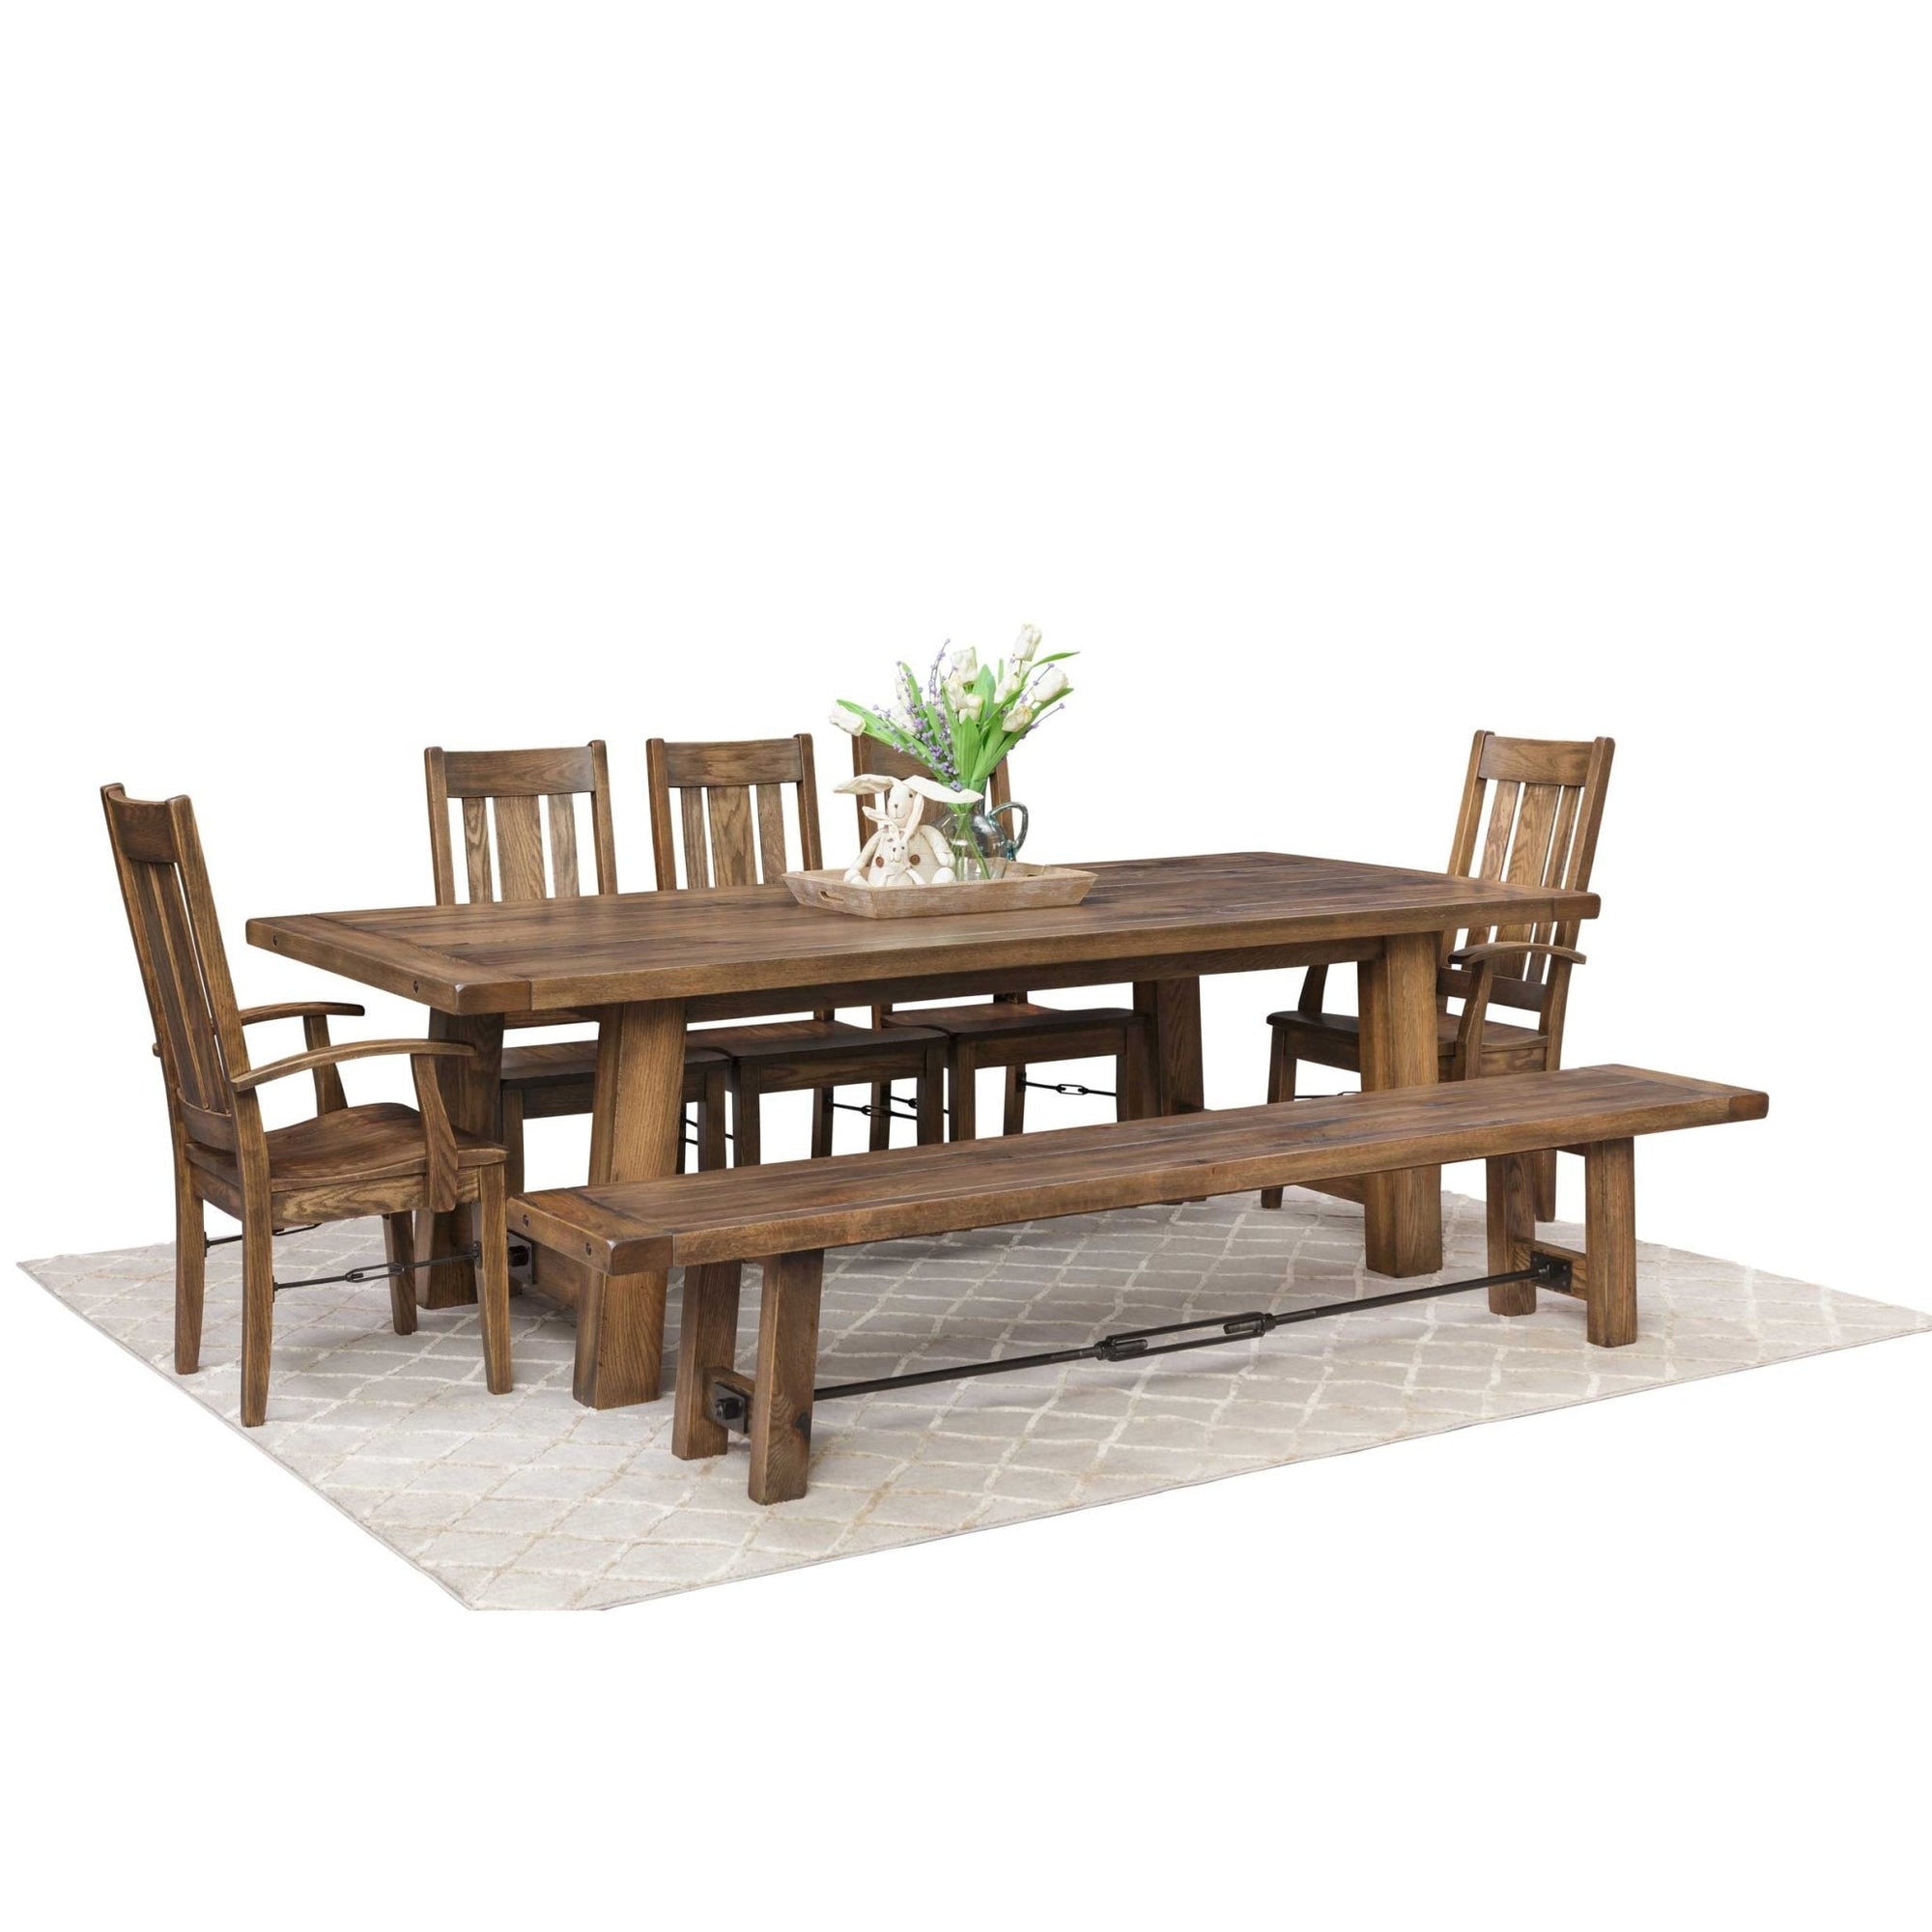 Ouray Amish Iron Buckle Trestle 96" Dining Table 7pc Set - snyders.furniture